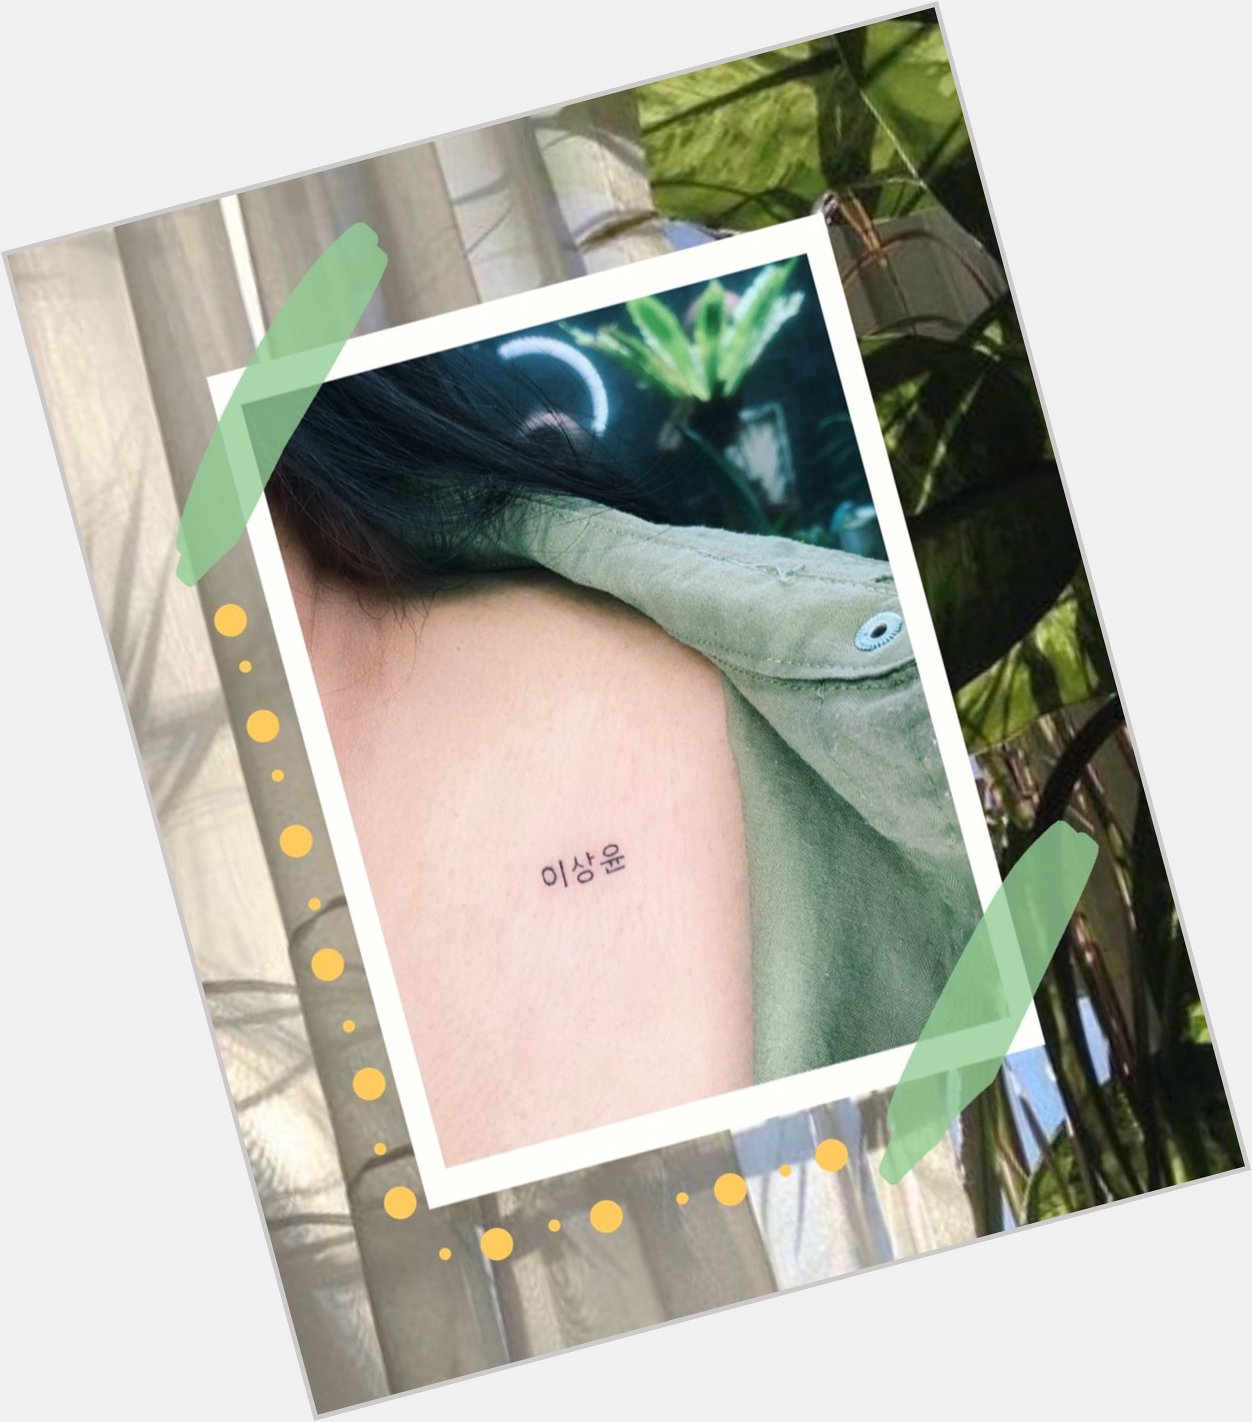 My first tattoo special gift for lee sang yoon birthday.

Happy birthday   